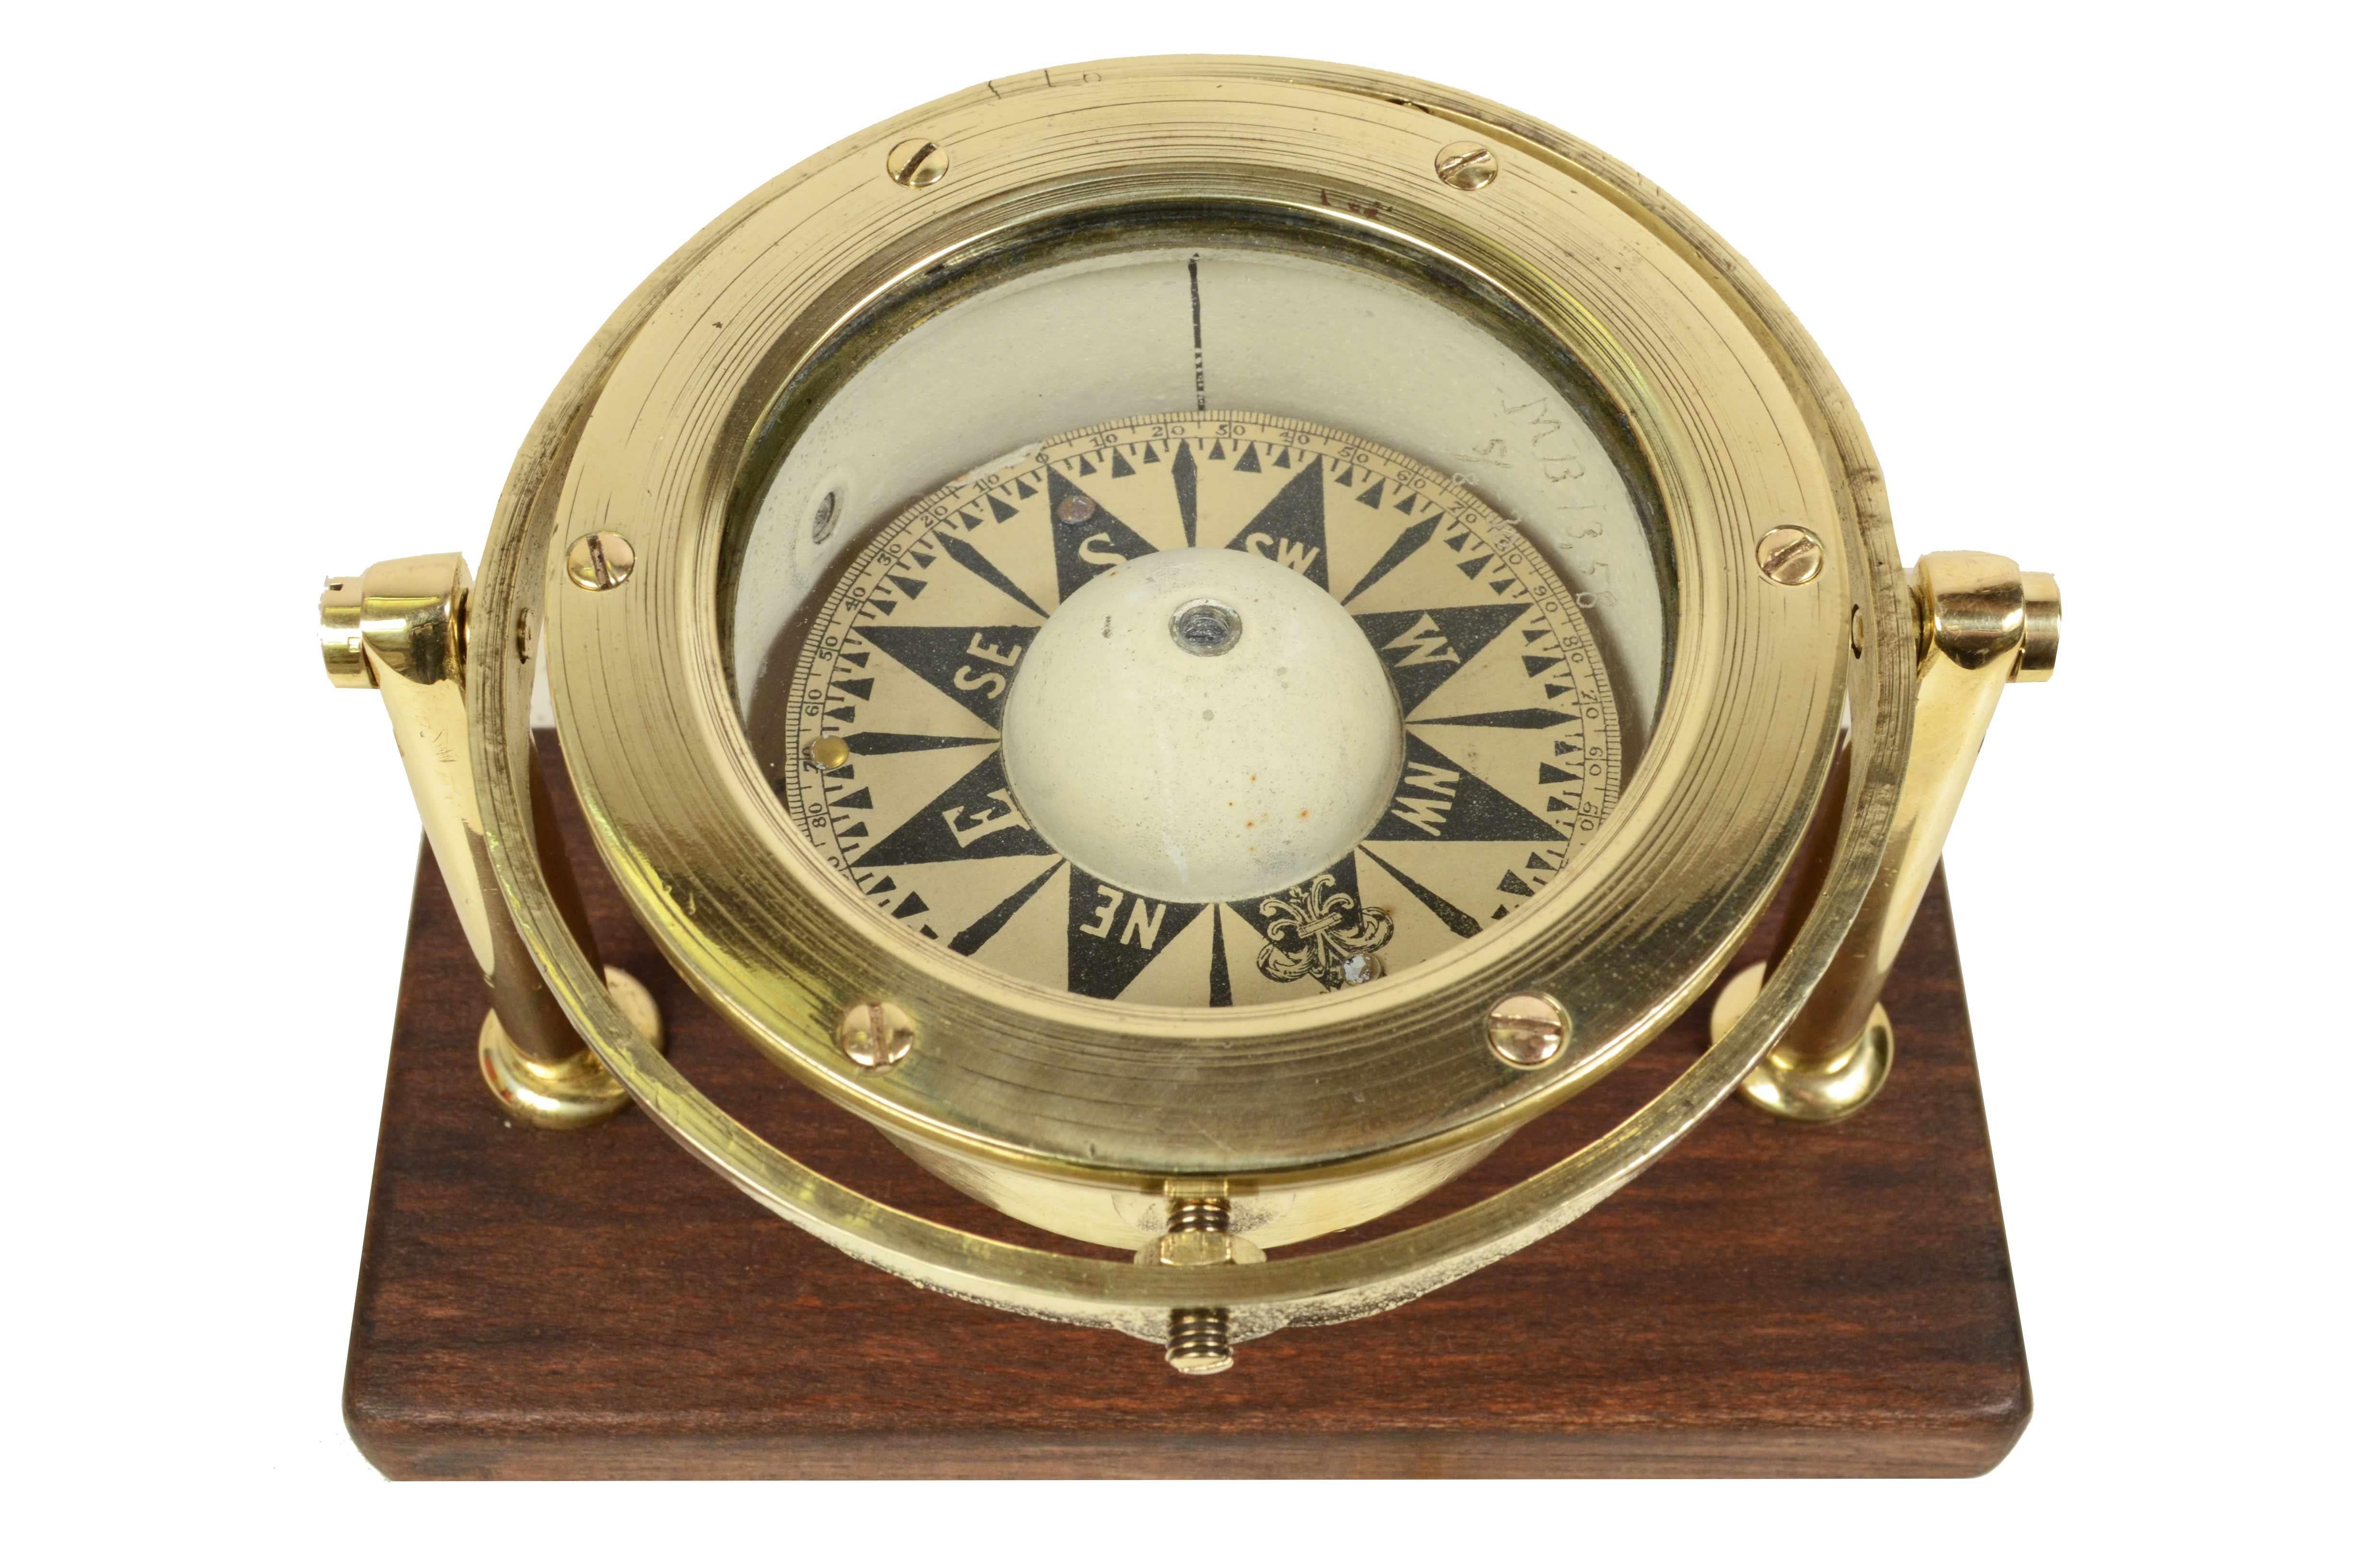 Brass and glass compass on universal joint from the end of the 19th century. Mounted on custom wood board. The compass consists of a cylindrical brass container, called a mortar, with double glass on the bottom of which is fixed a hard metal stem,